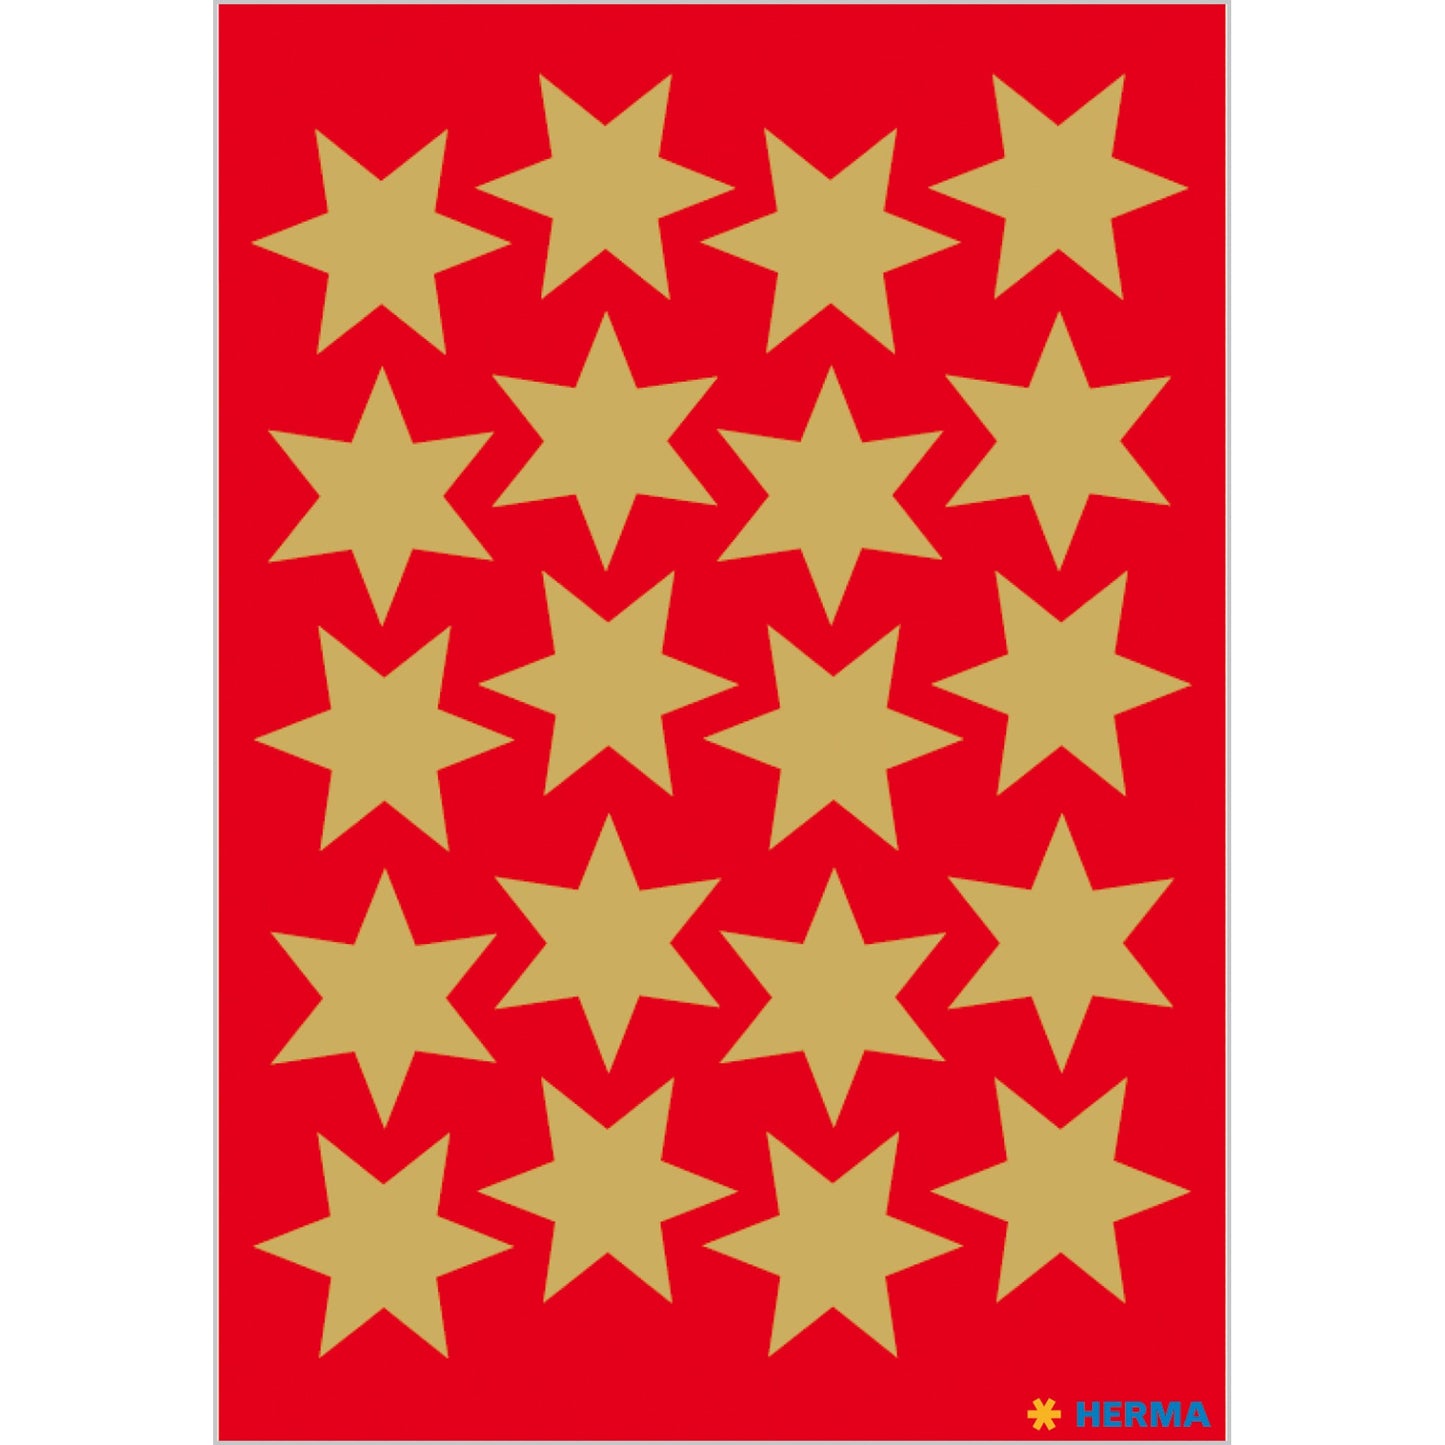 Stickers stars 6-pointed, Gold Ø 21 mm (3905)